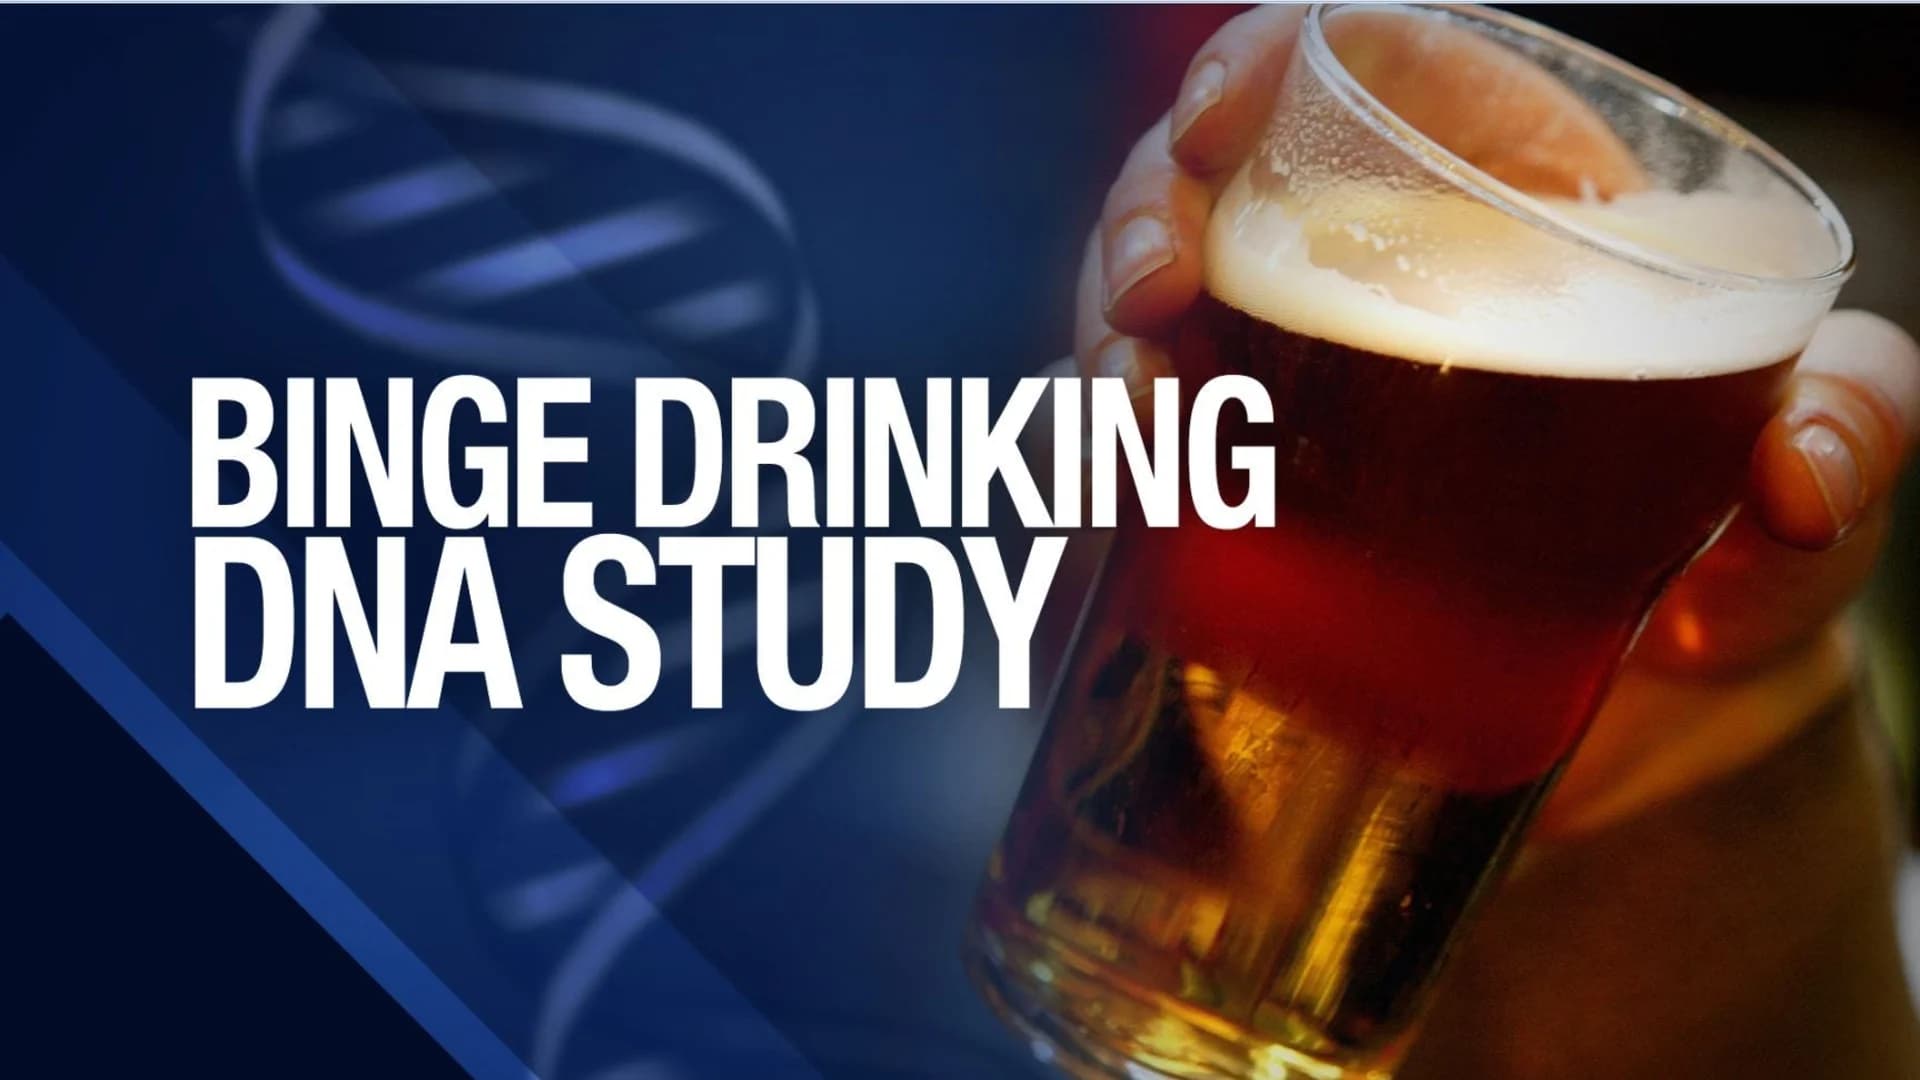 Better slow down: Study finds binge drinking can rewrite your DNA